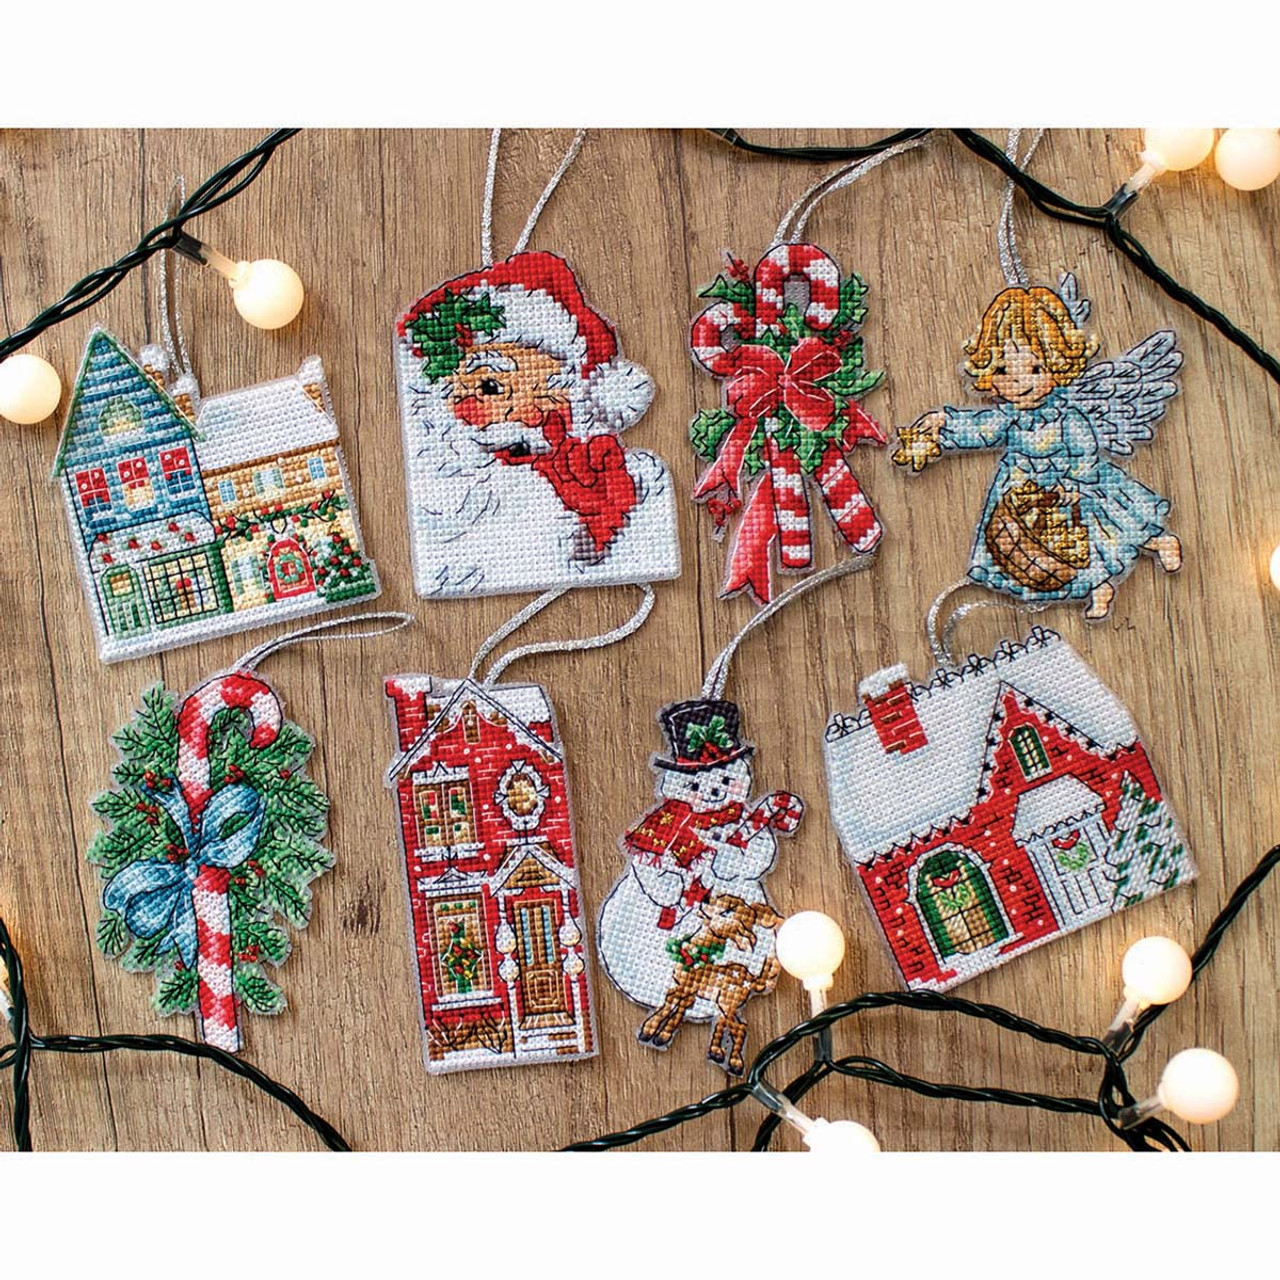 Counted Cross-Stitch Kit on Plastic Canvas with Christmas Ornaments. Fascinating Chart 3.74x3.94 Inches 139CS. Marvelous for Embroidery & Needlework